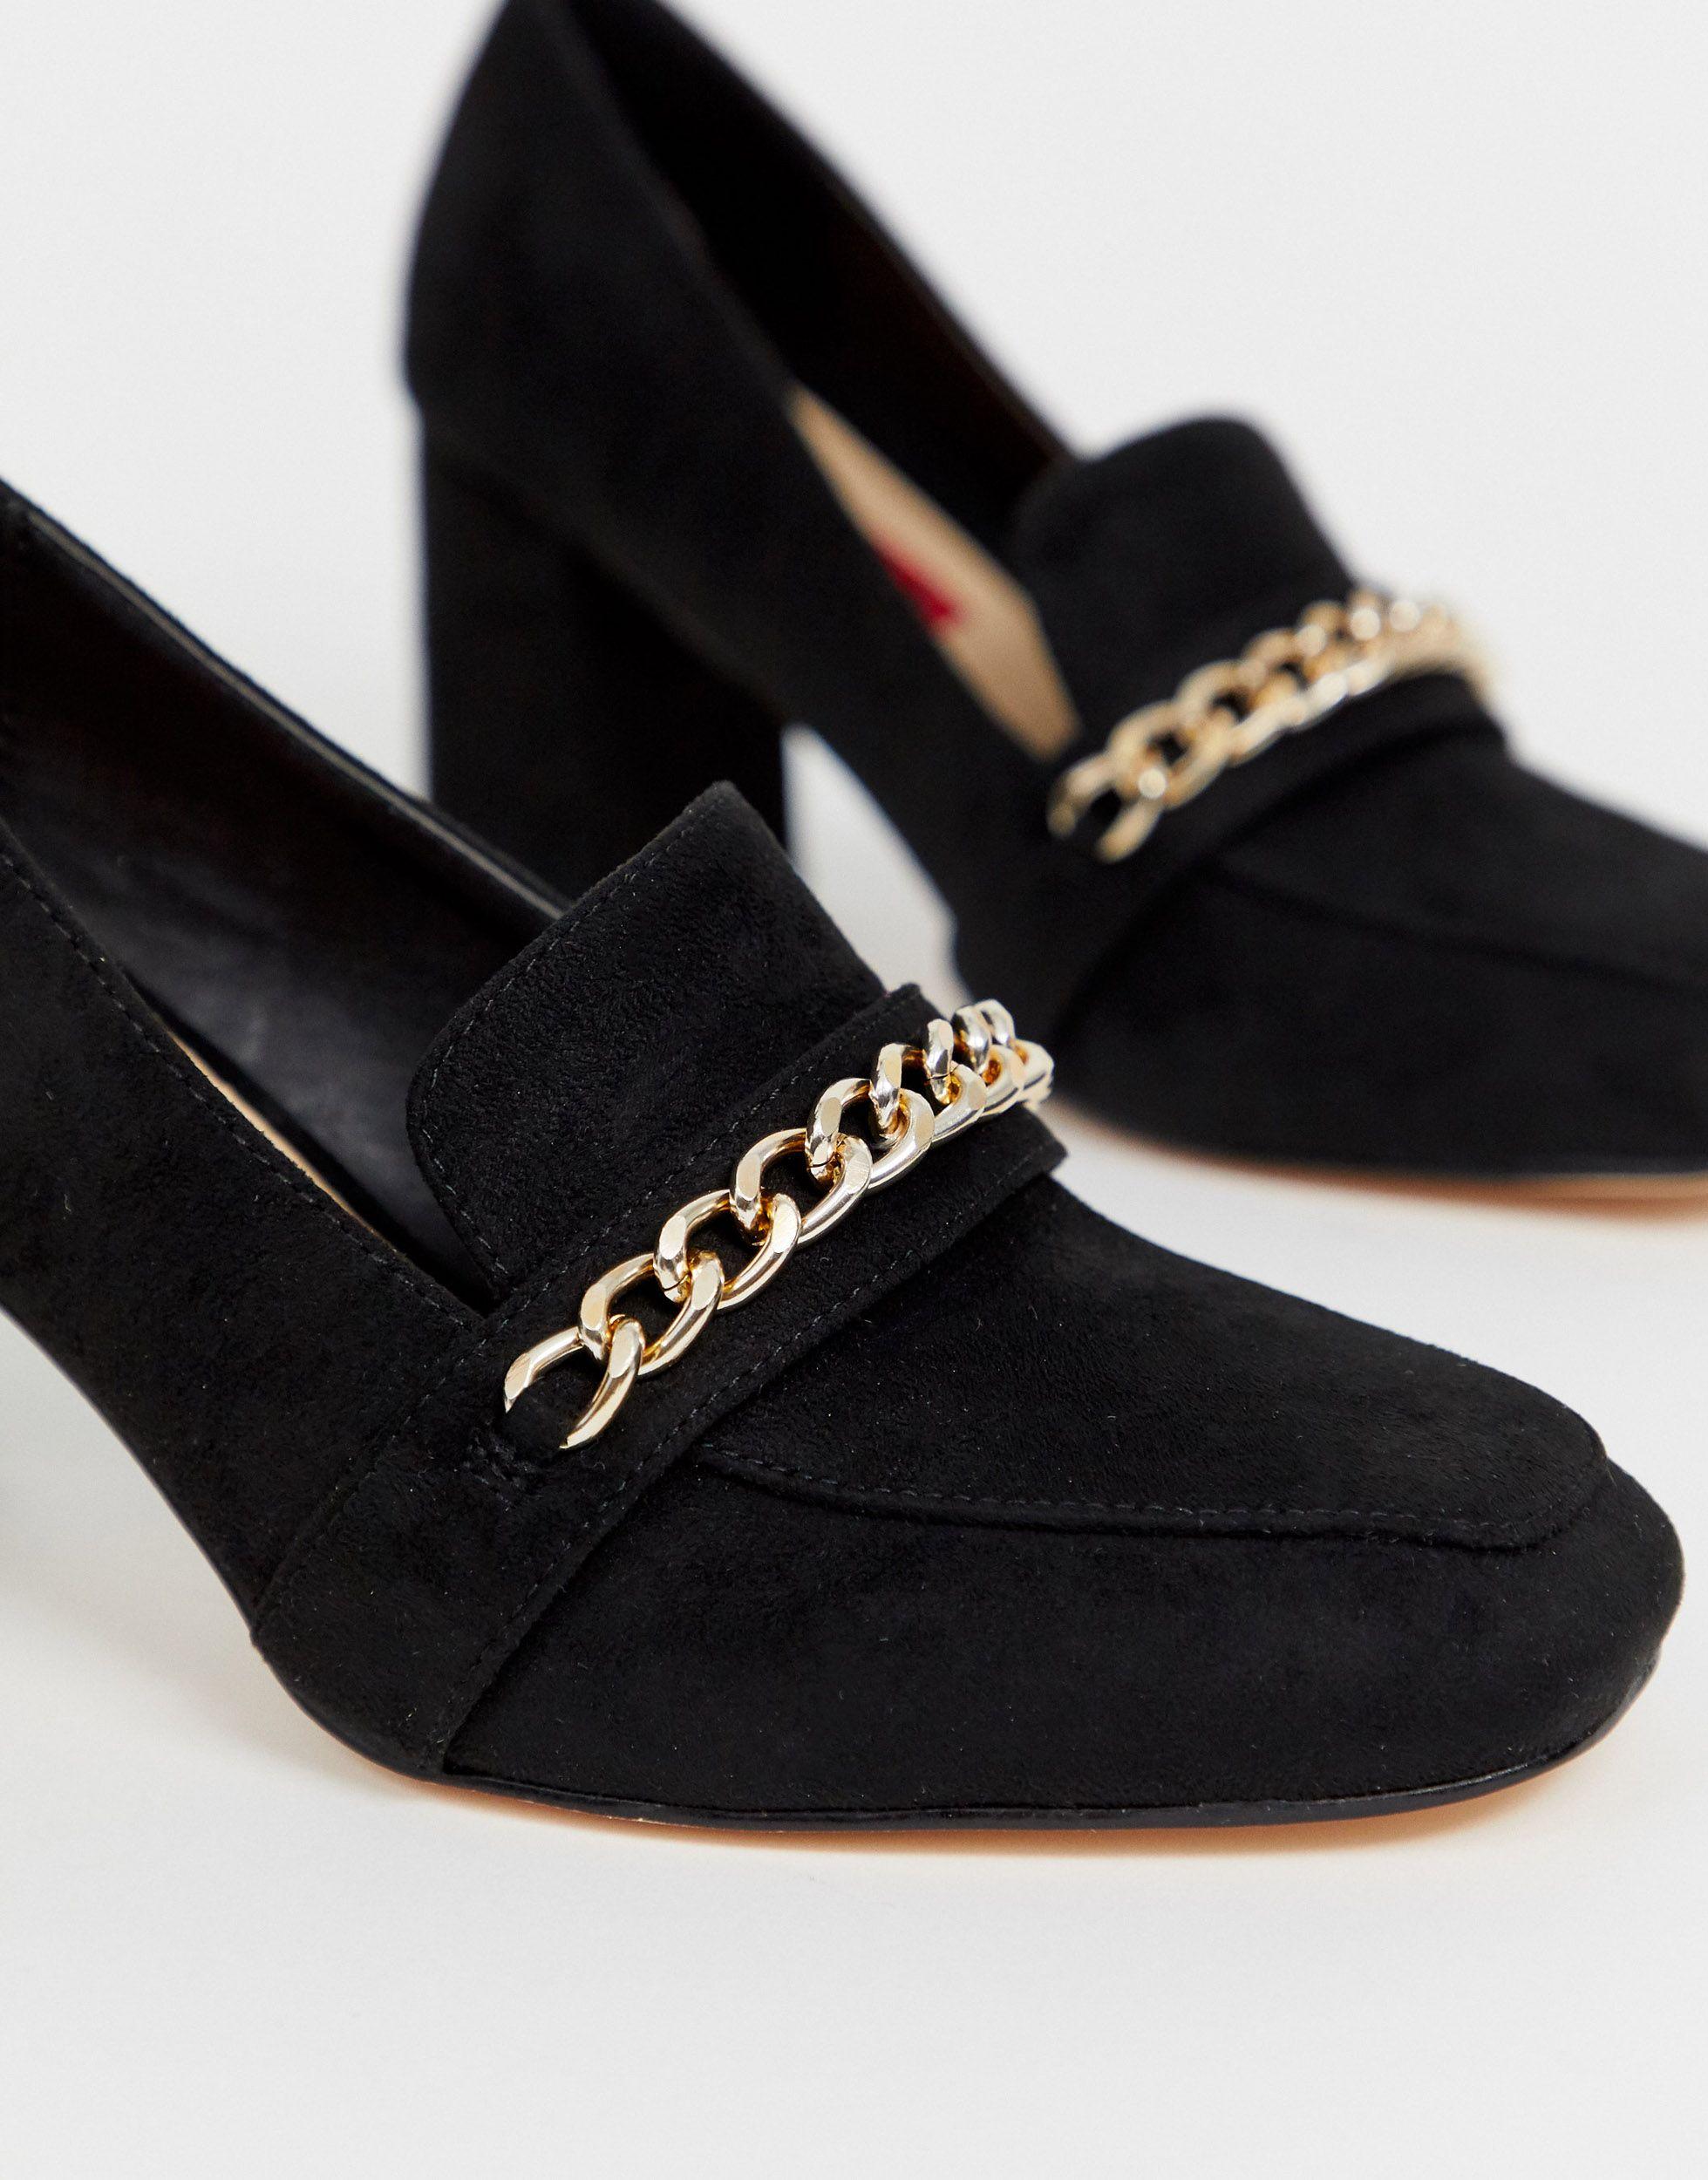 niets Helm bevroren London Rebel Heeled Loafer Shoes With Gold Chain in Black | Lyst